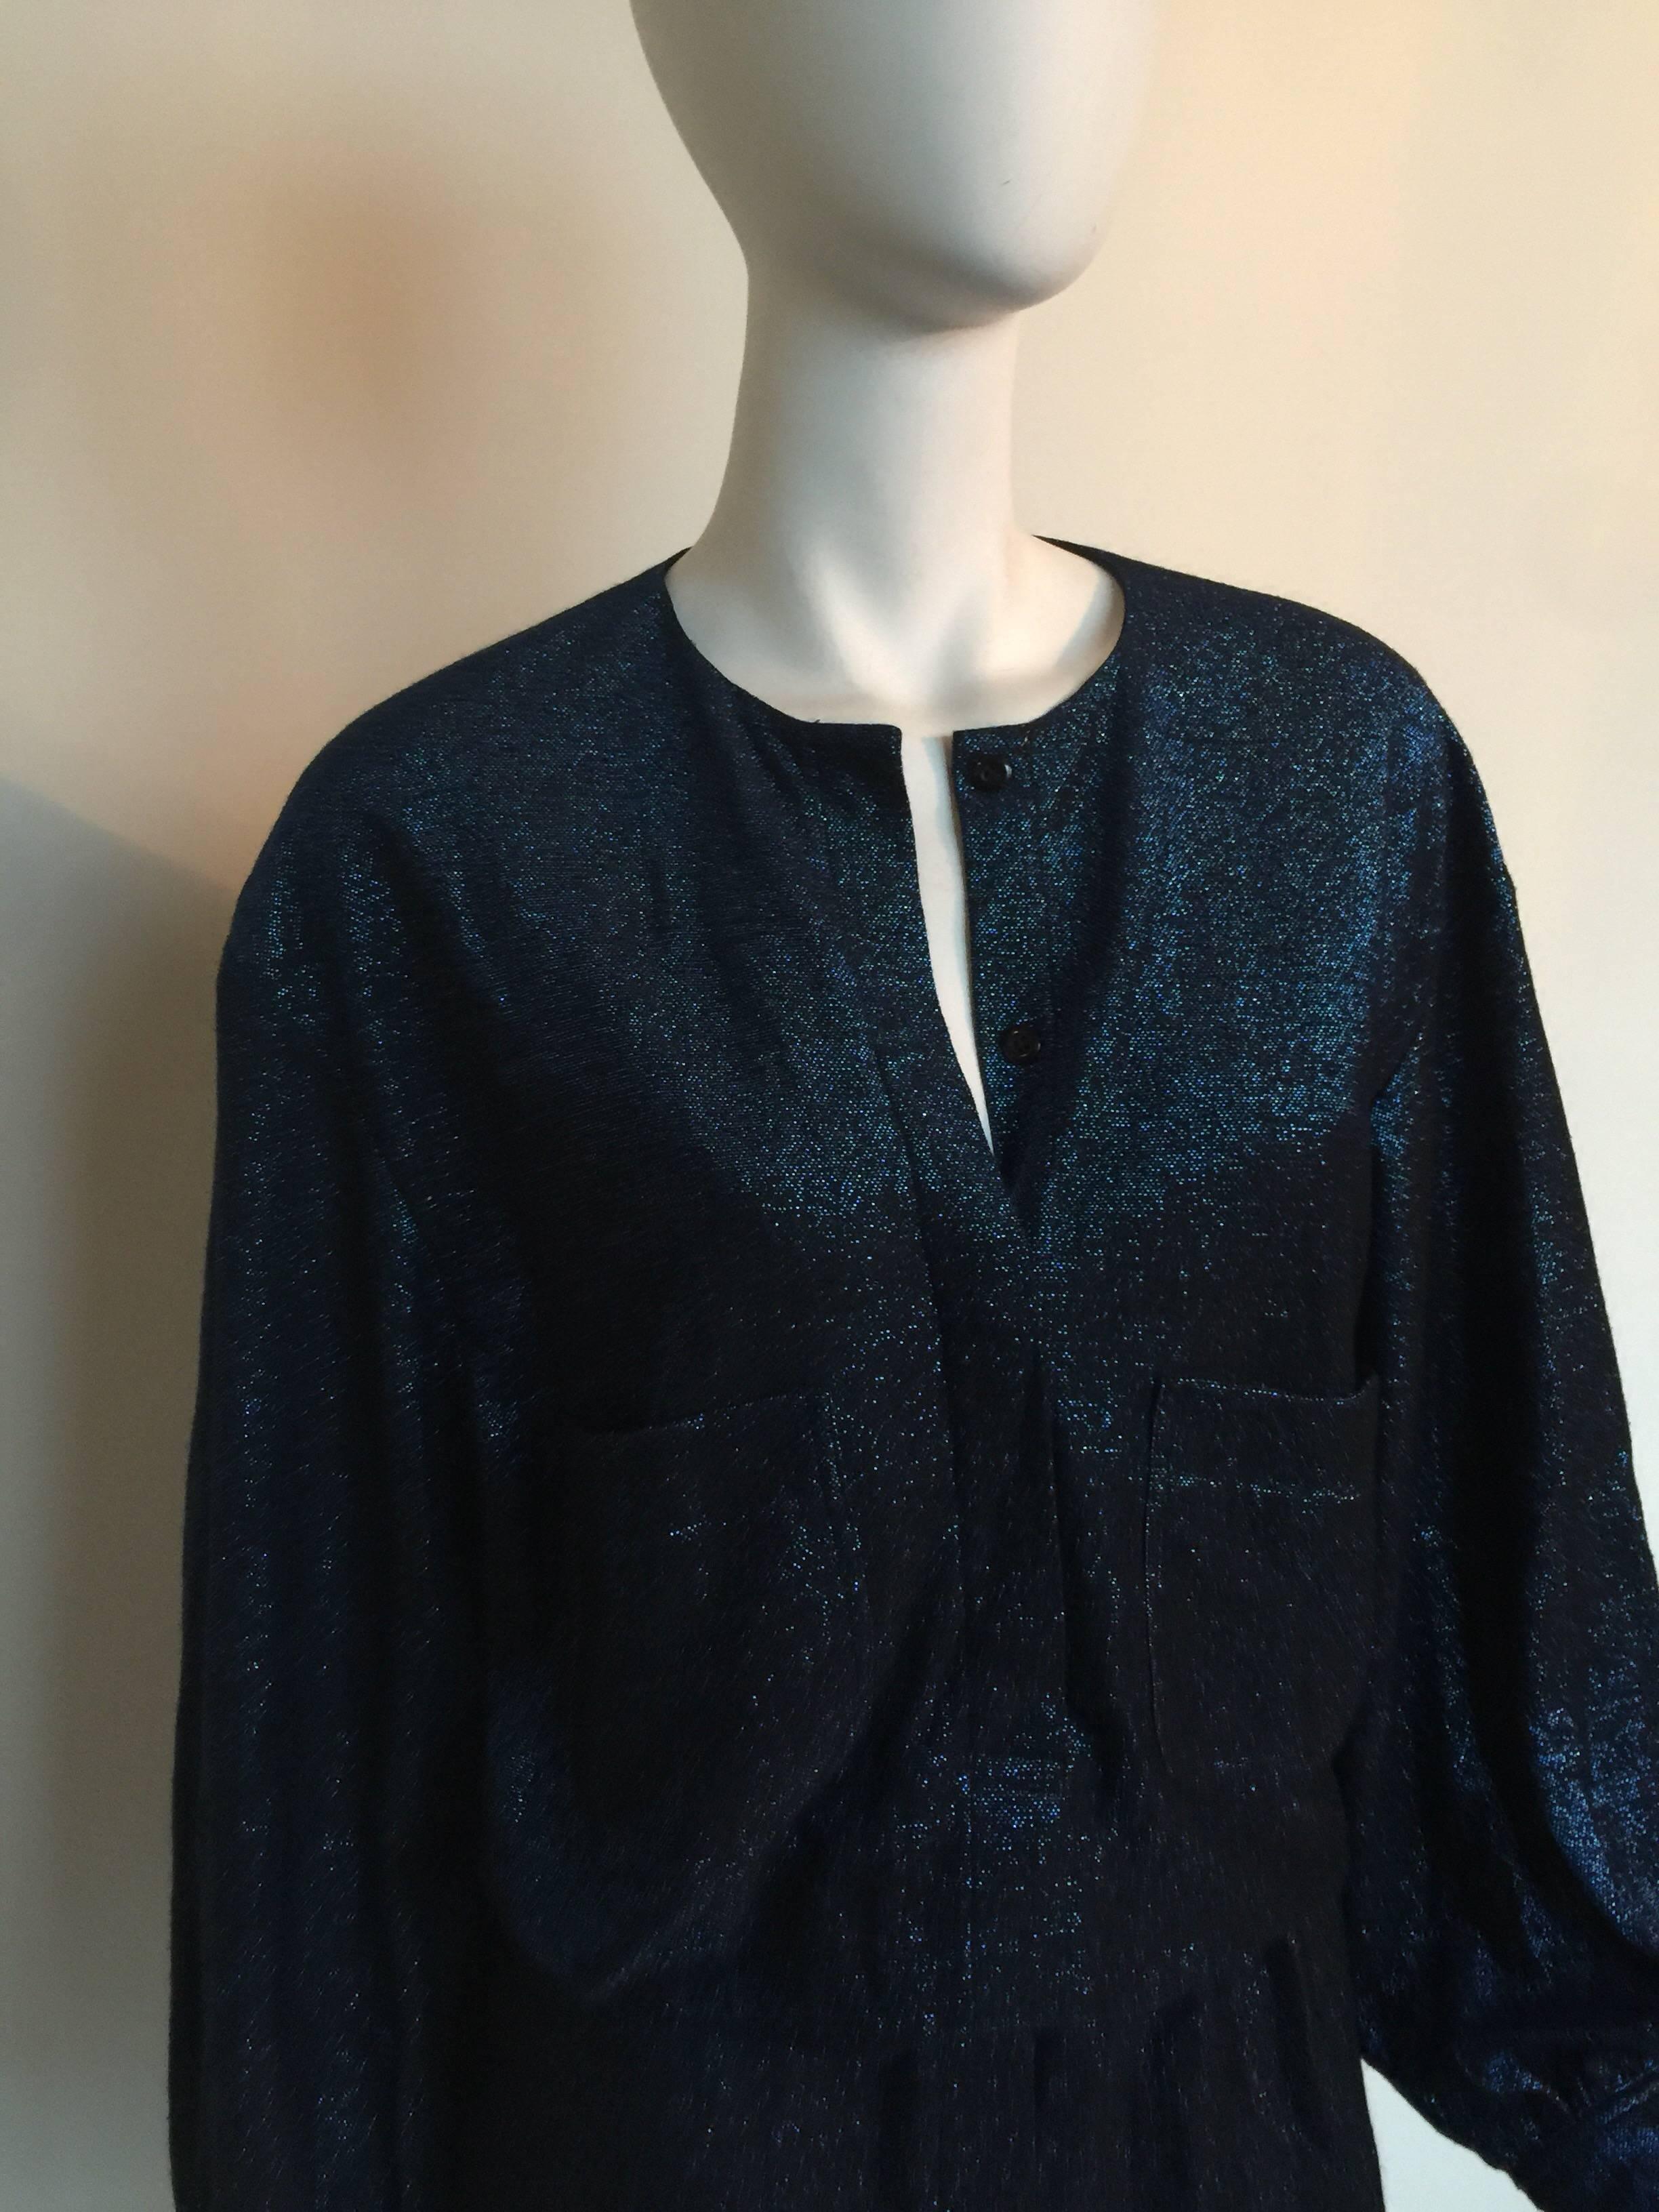 Giorgio di Sant'Angelo midnight blue sparkle dress is from the 1970s.  This metallic knit sweater dress has a drop elastic waist and two front pockets.  It fits a size L but could easily be tailored.  It is pinned in the first photo on the mannequin